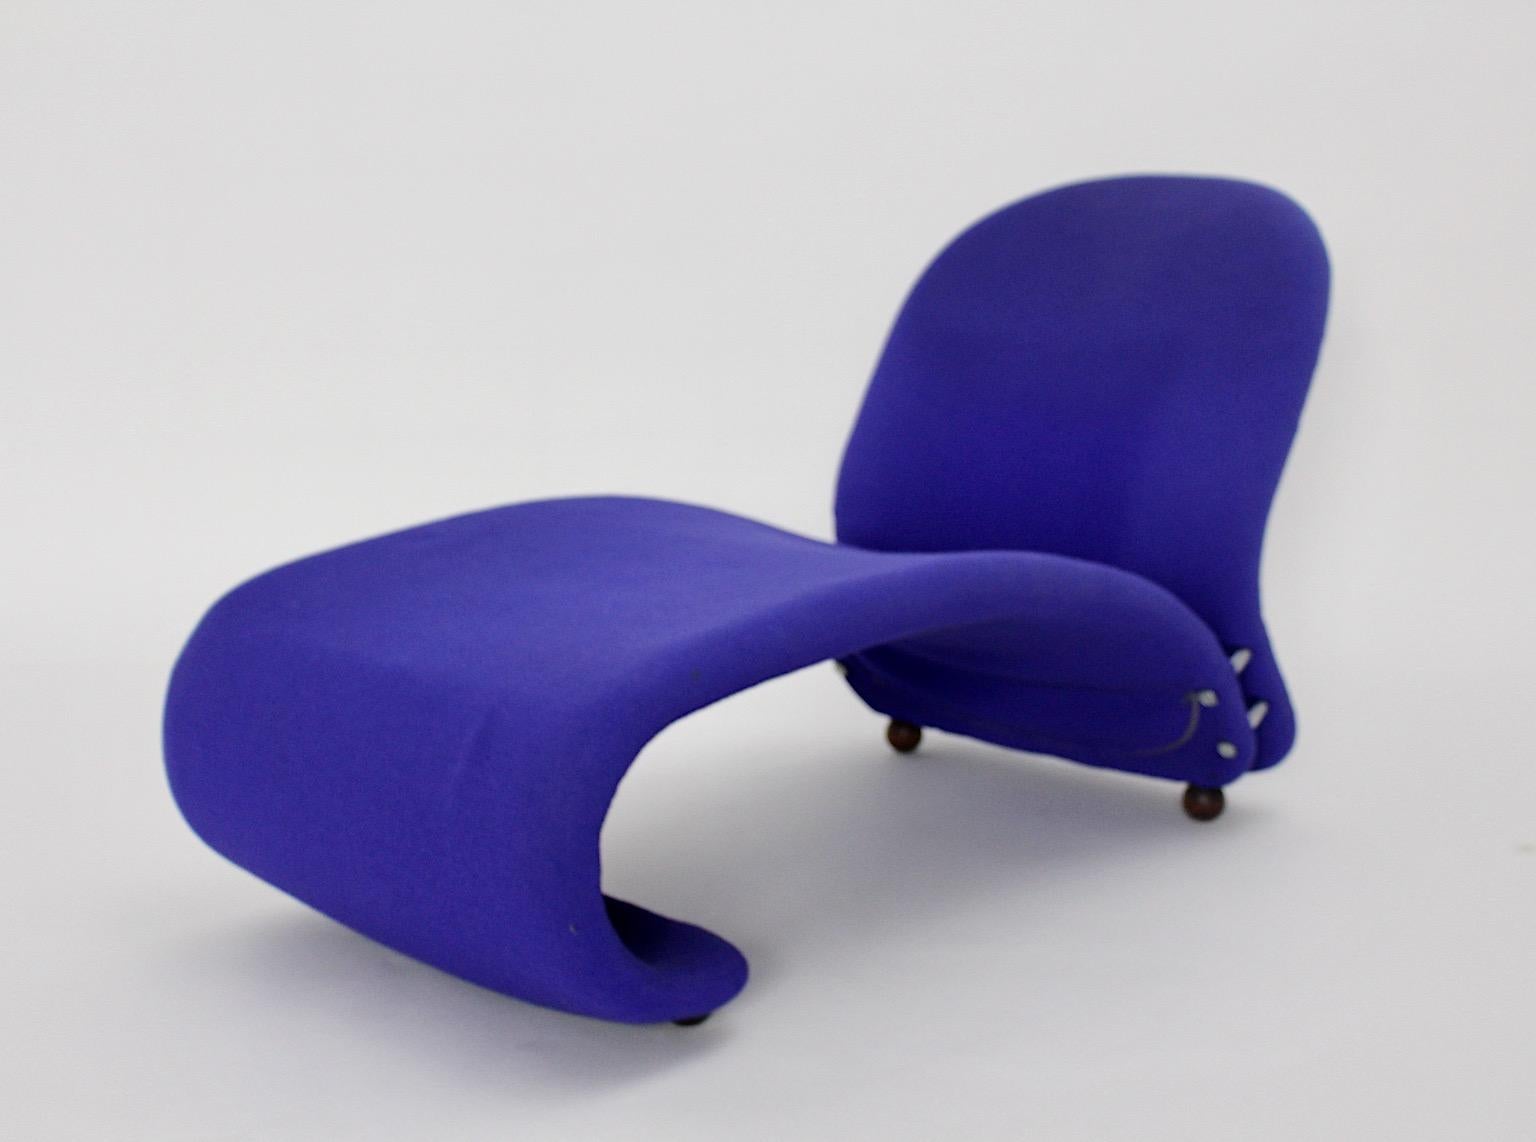 Fabric Space Age Vintage Organic Anthropomorph Blue Chaise Longue Verner Panton 1962/63 For Sale